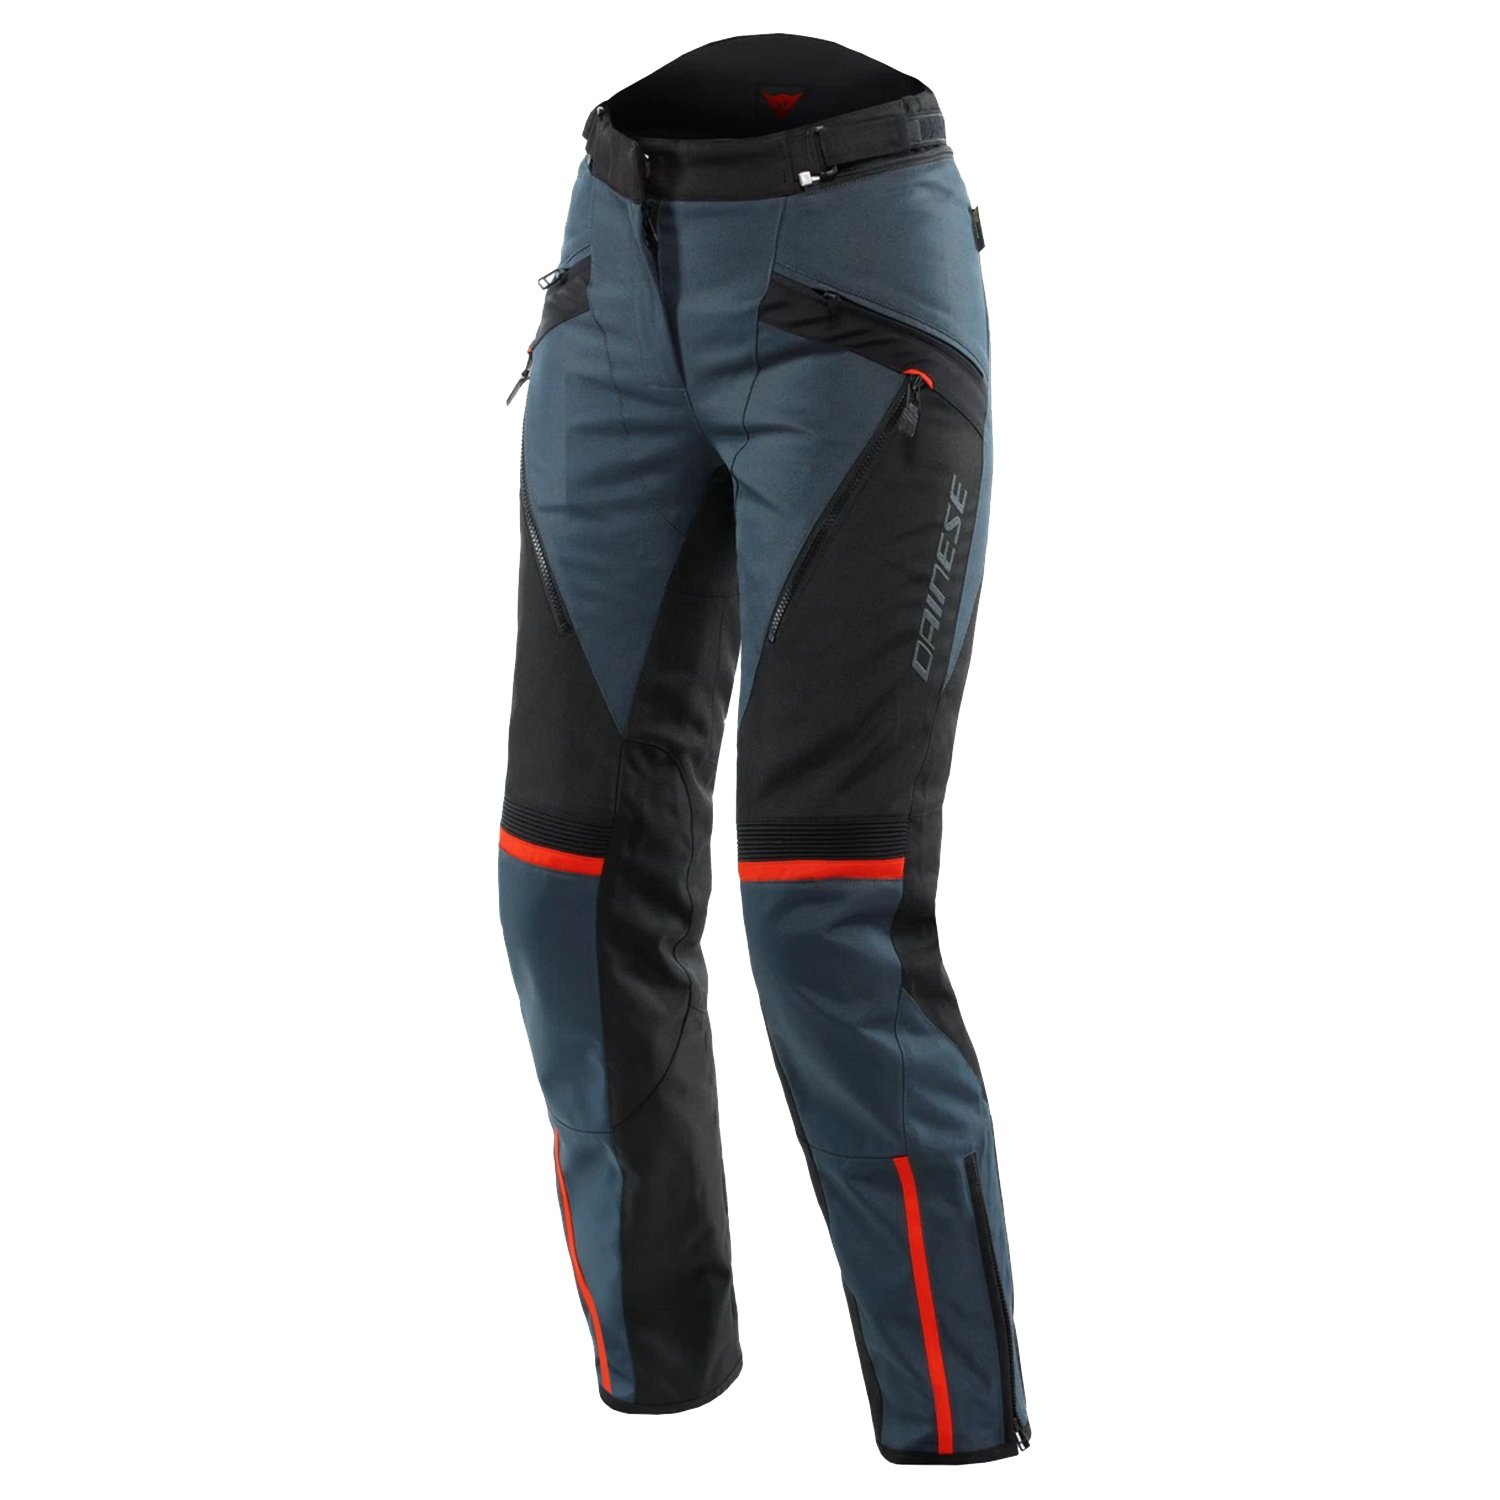 Image of Dainese Tempest 3 D-Dry Lady Pants Ebony Black Lava Red Size 38 ID 8051019405821